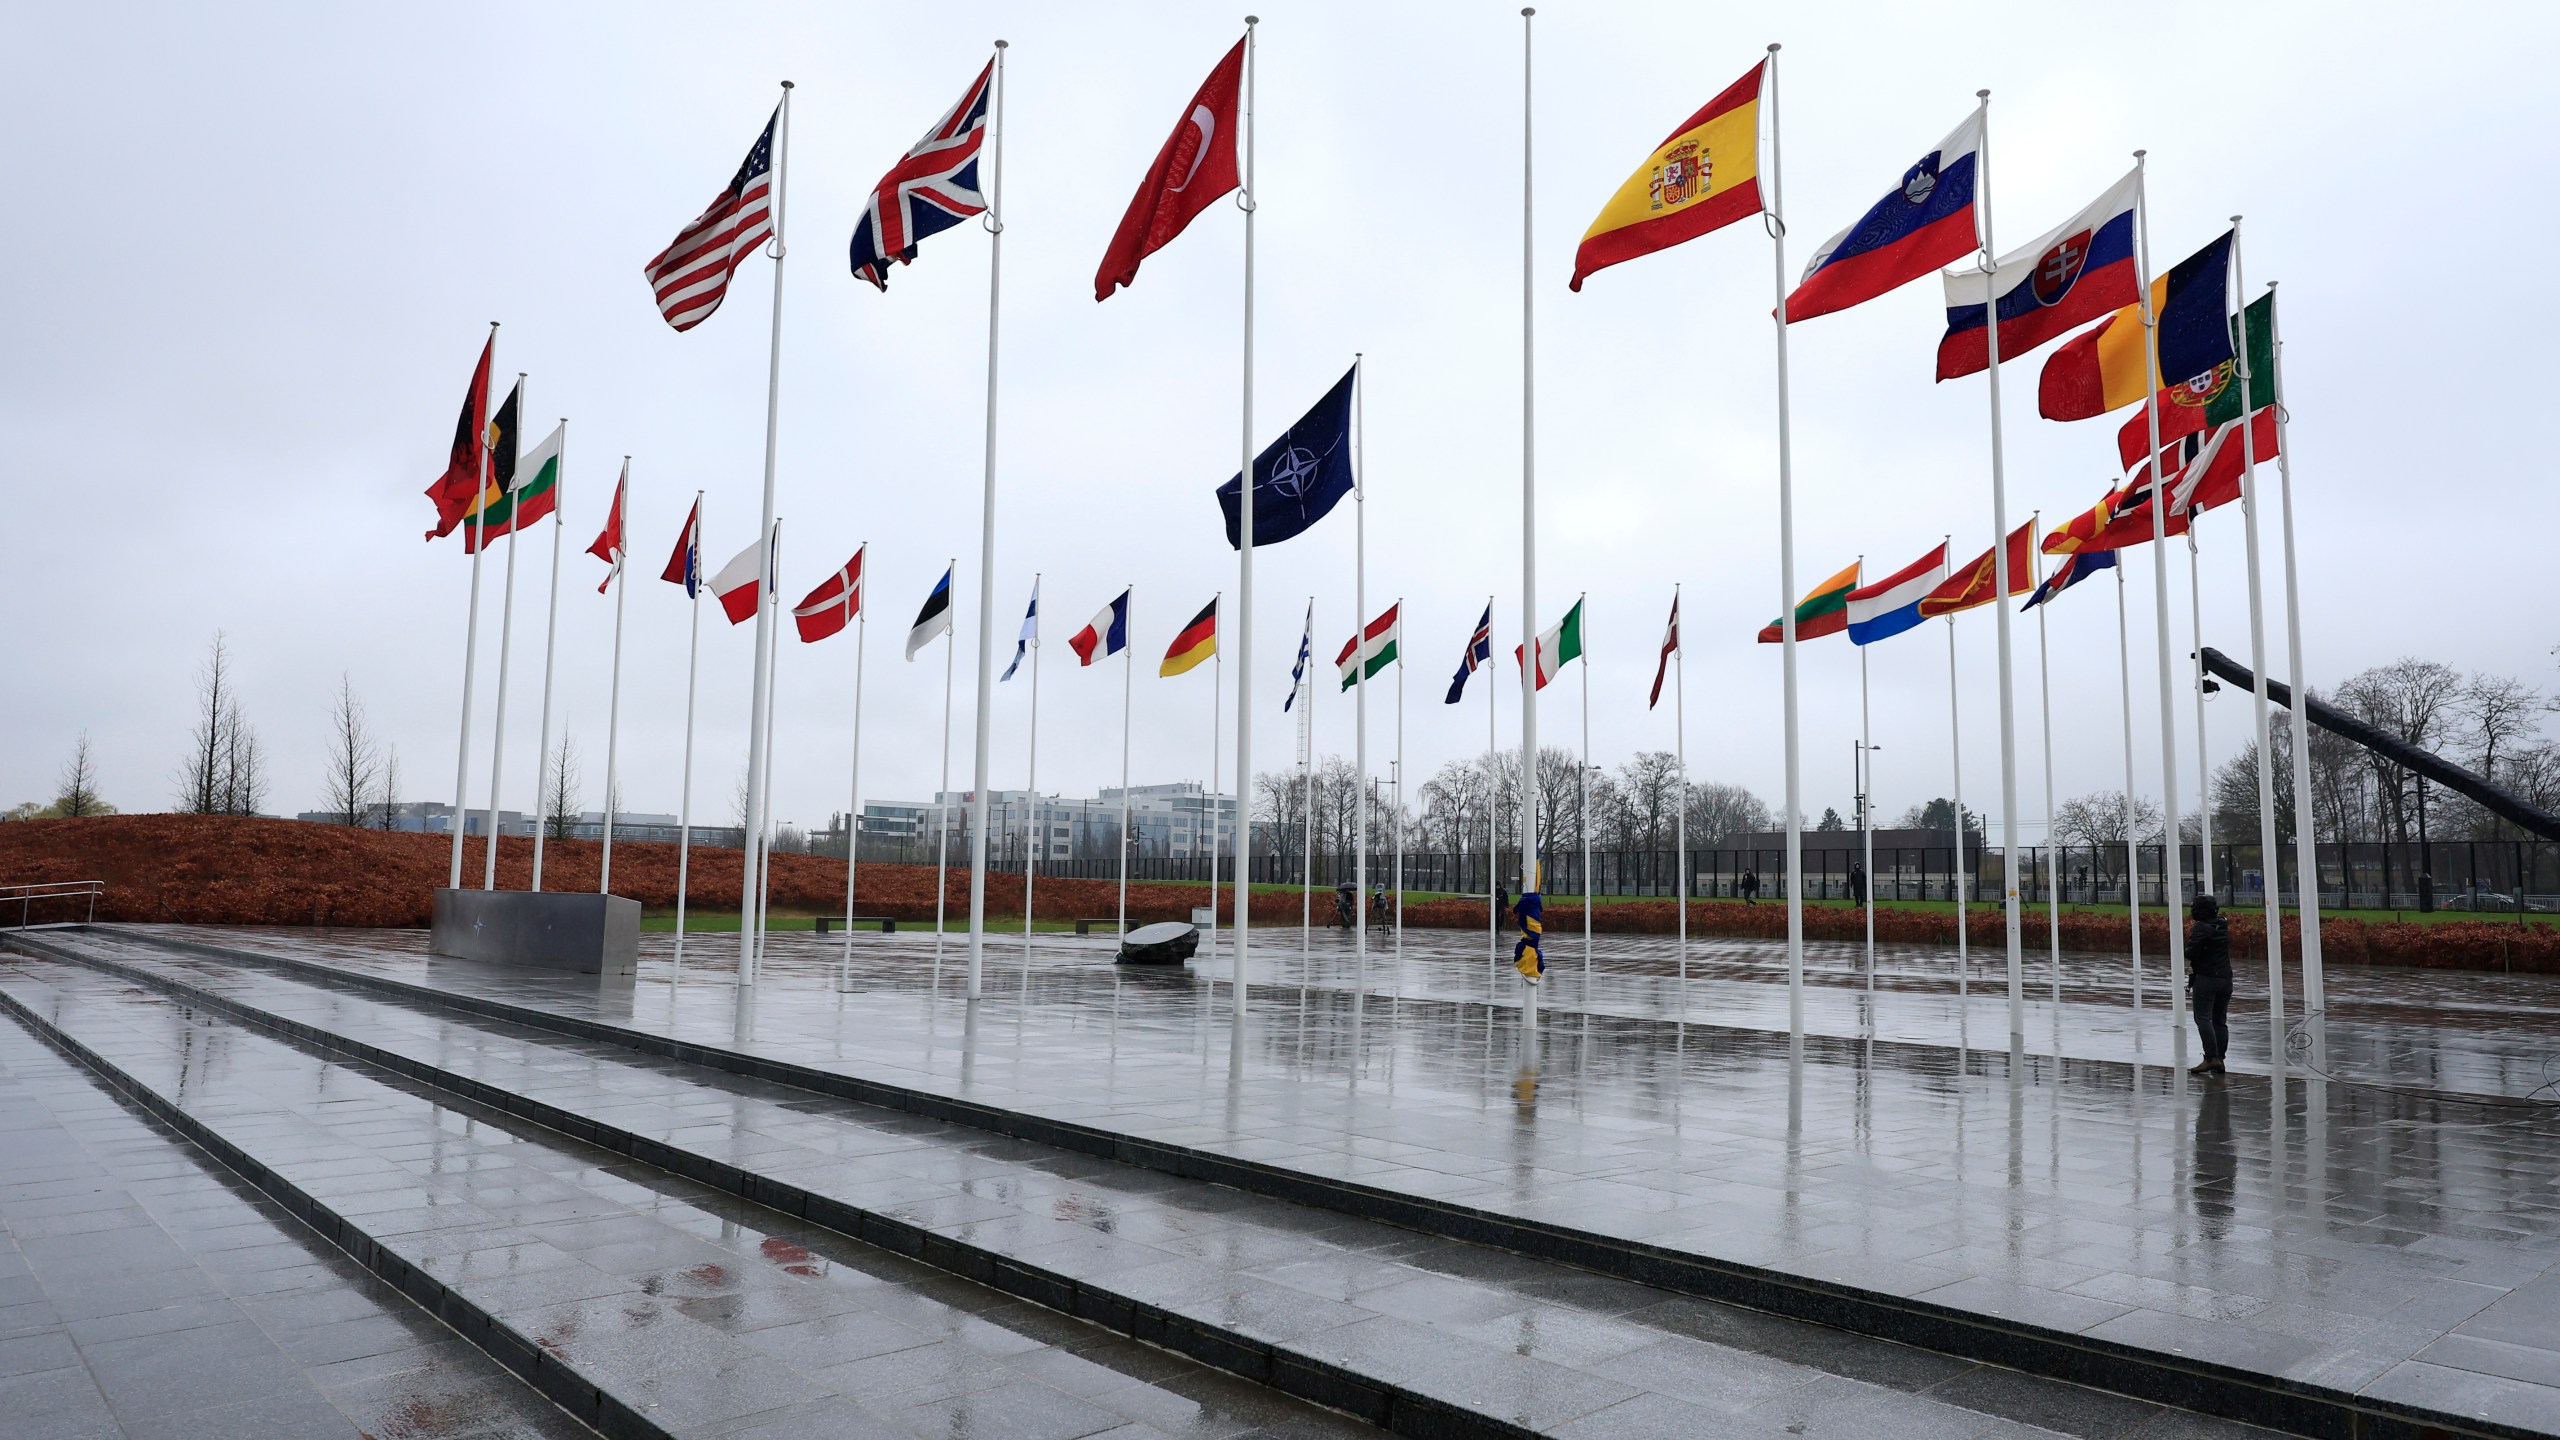 Flags of NATO nations flap in the wind along with an empty flagpole as protocol prepare for a flag raising ceremony to mark the accession of Sweden at NATO headquarters in Brussels, Monday, March 11, 2024. Sweden has formally joined NATO as the 32nd member of the transatlantic military alliance, ending decades of post-World War II neutrality and centuries of broader non-alignment with major powers as security concerns in Europe have spiked following Russia's 2022 invasion of Ukraine. (AP Photo/Geert Vanden Wijngaert)